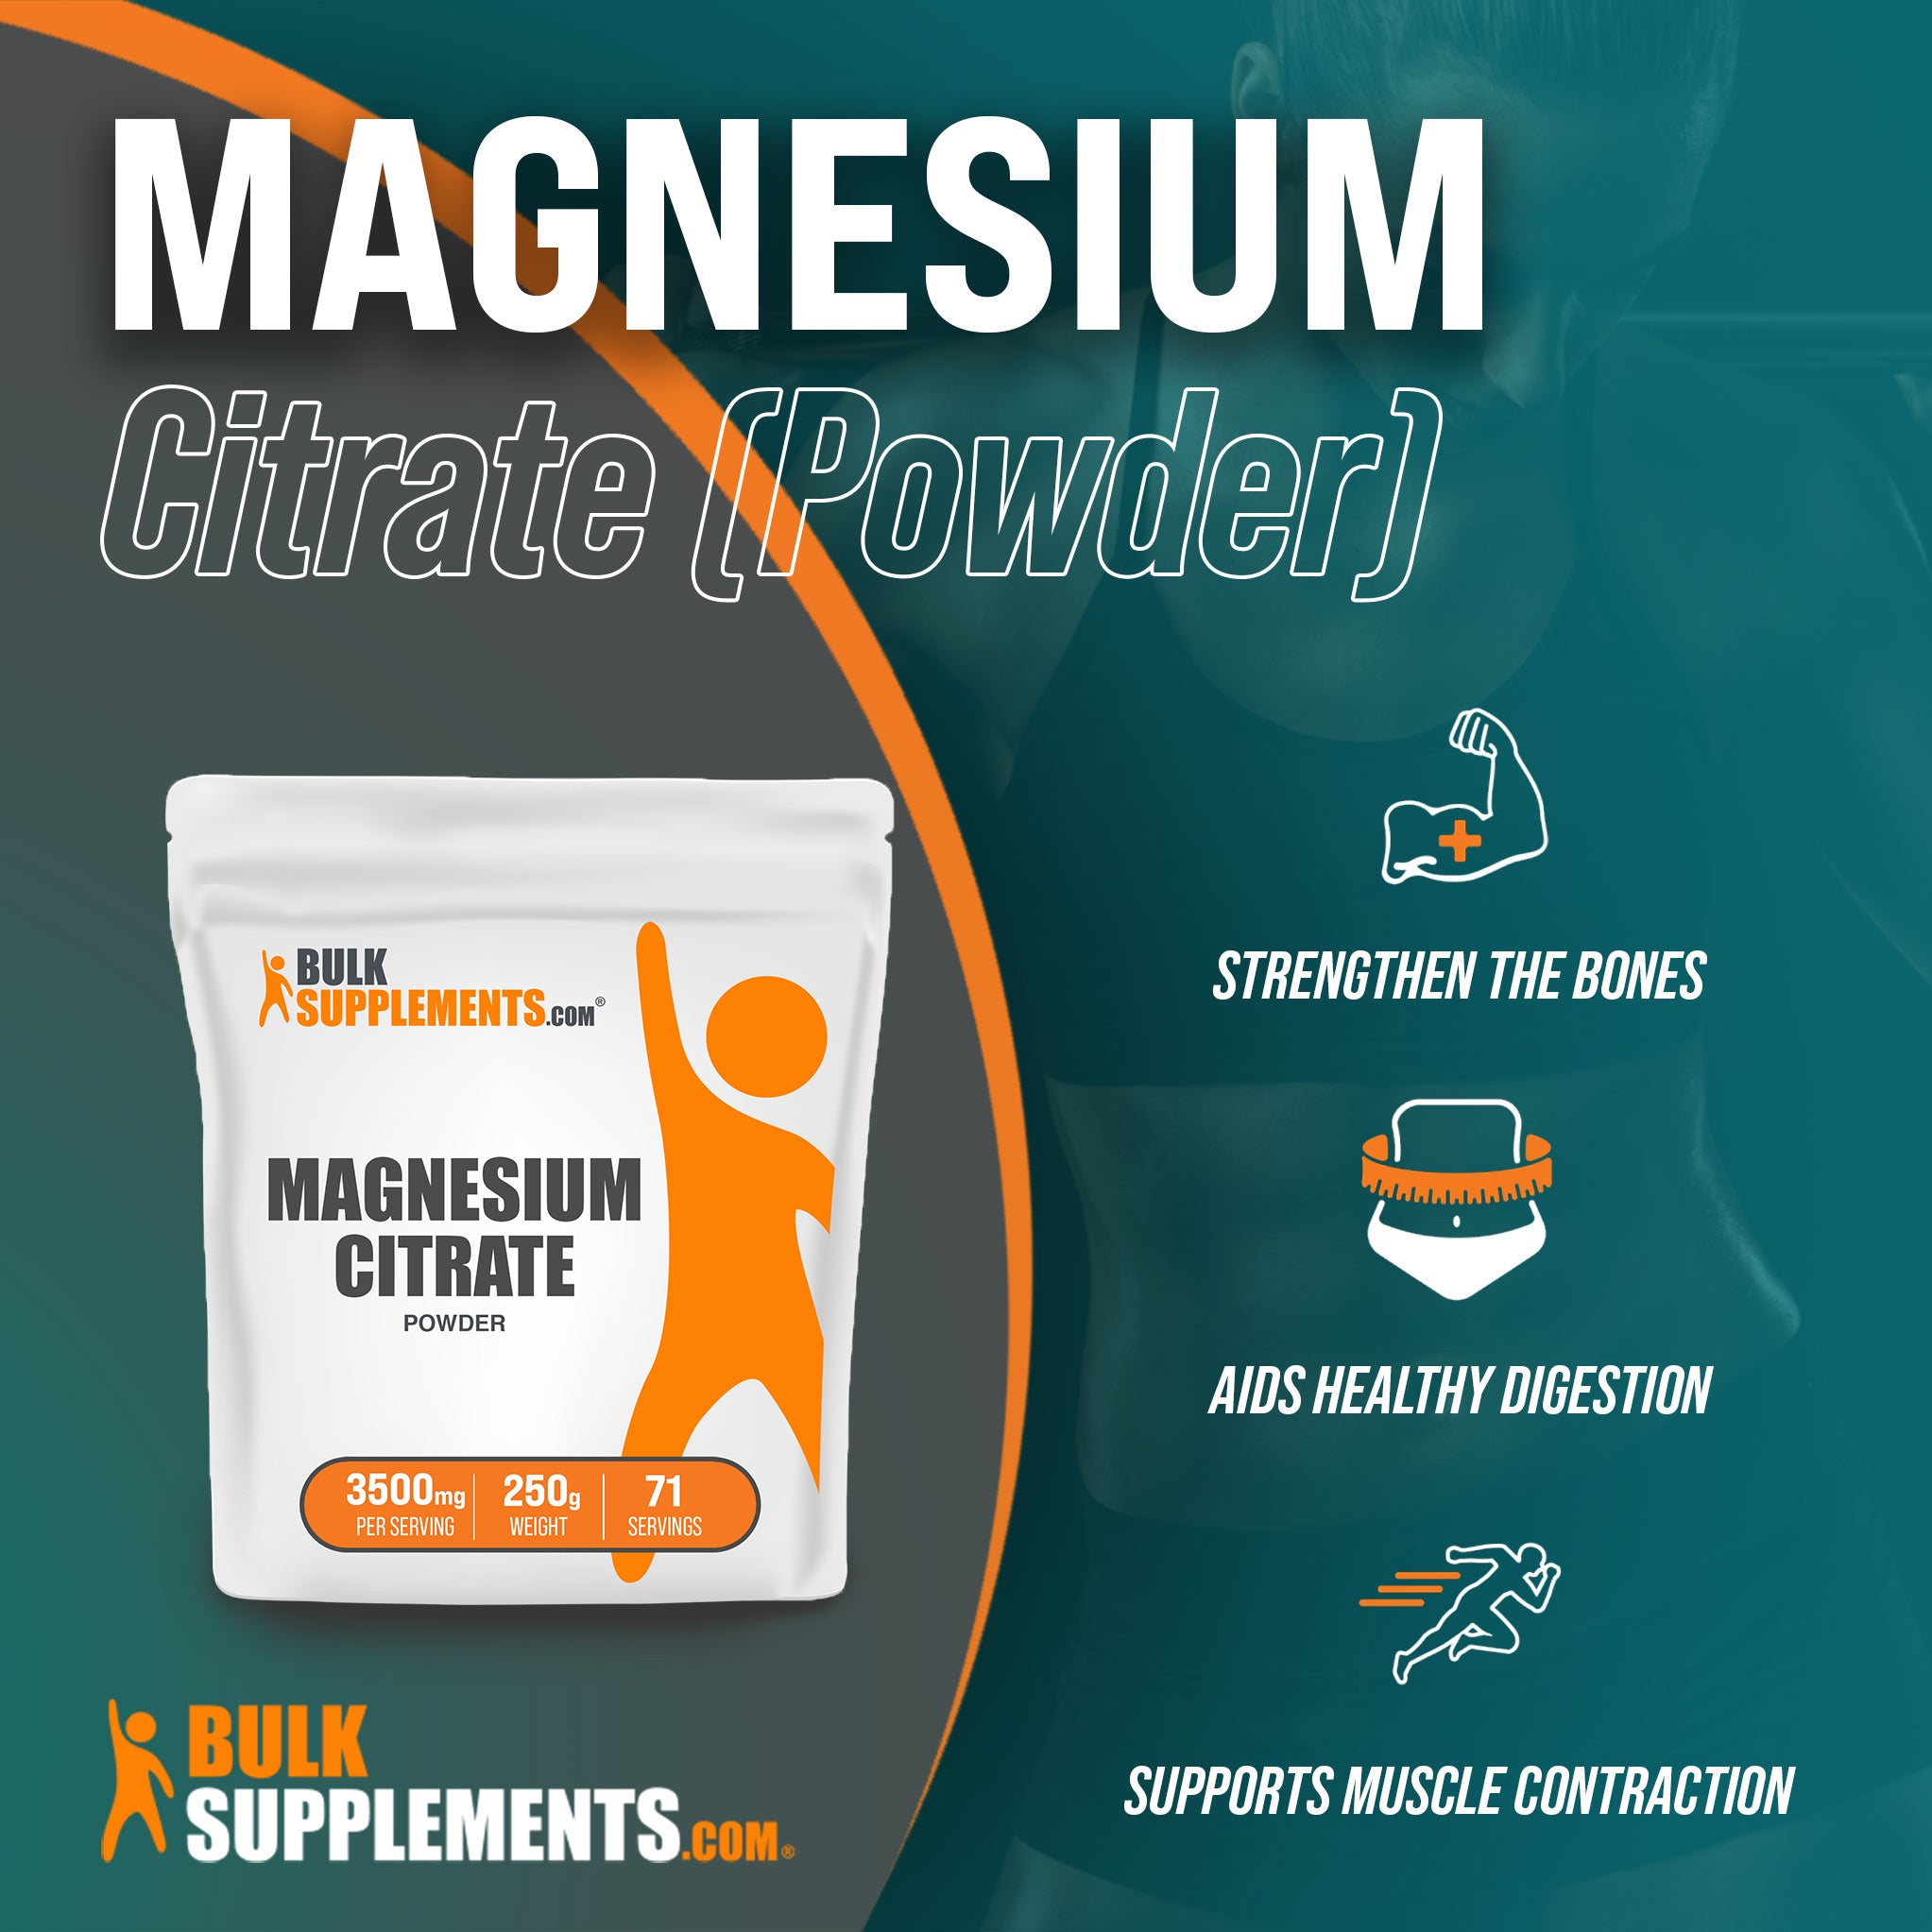 Benefits of Magnesium Citrate: strengthen the bones, aids healthy digestion, supports muscle contraction